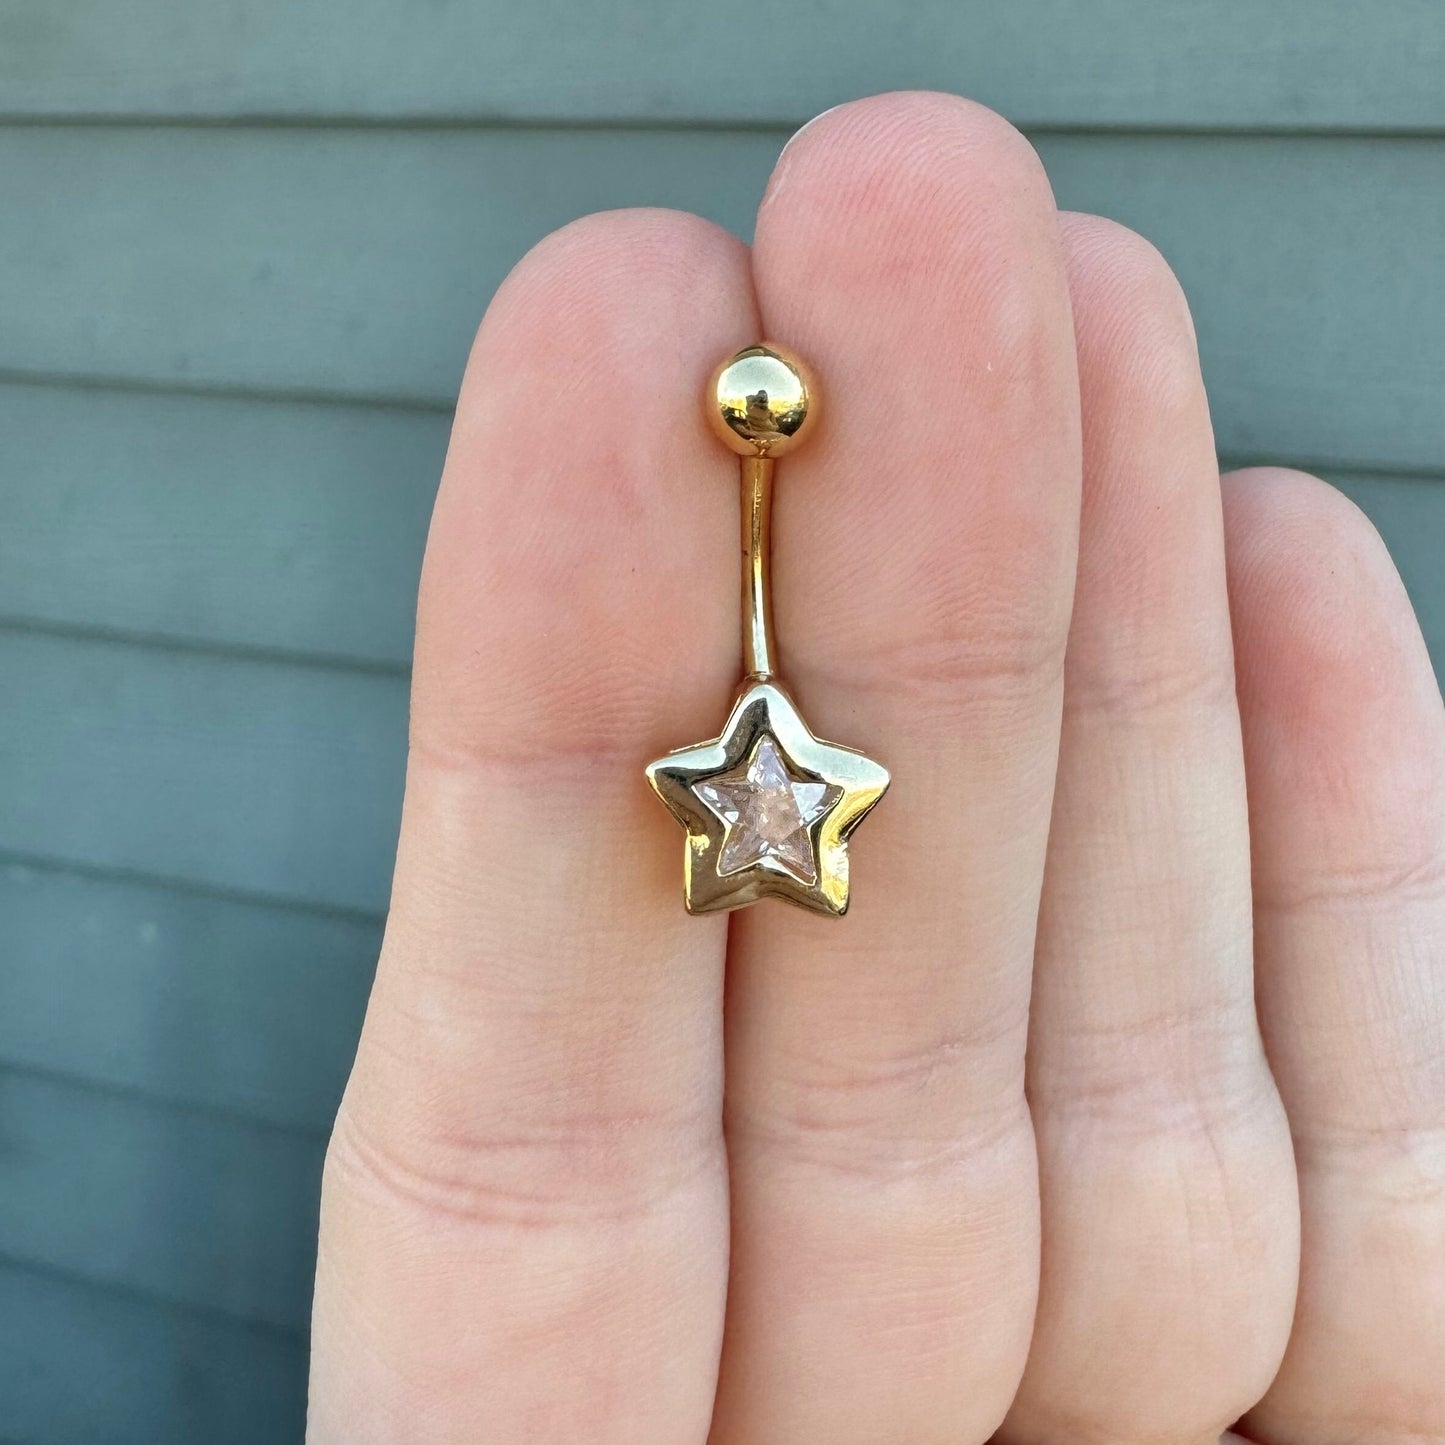 Simple Star Belly Button Ring (14G | 10mm | 14k Plated over Surgical Steel)